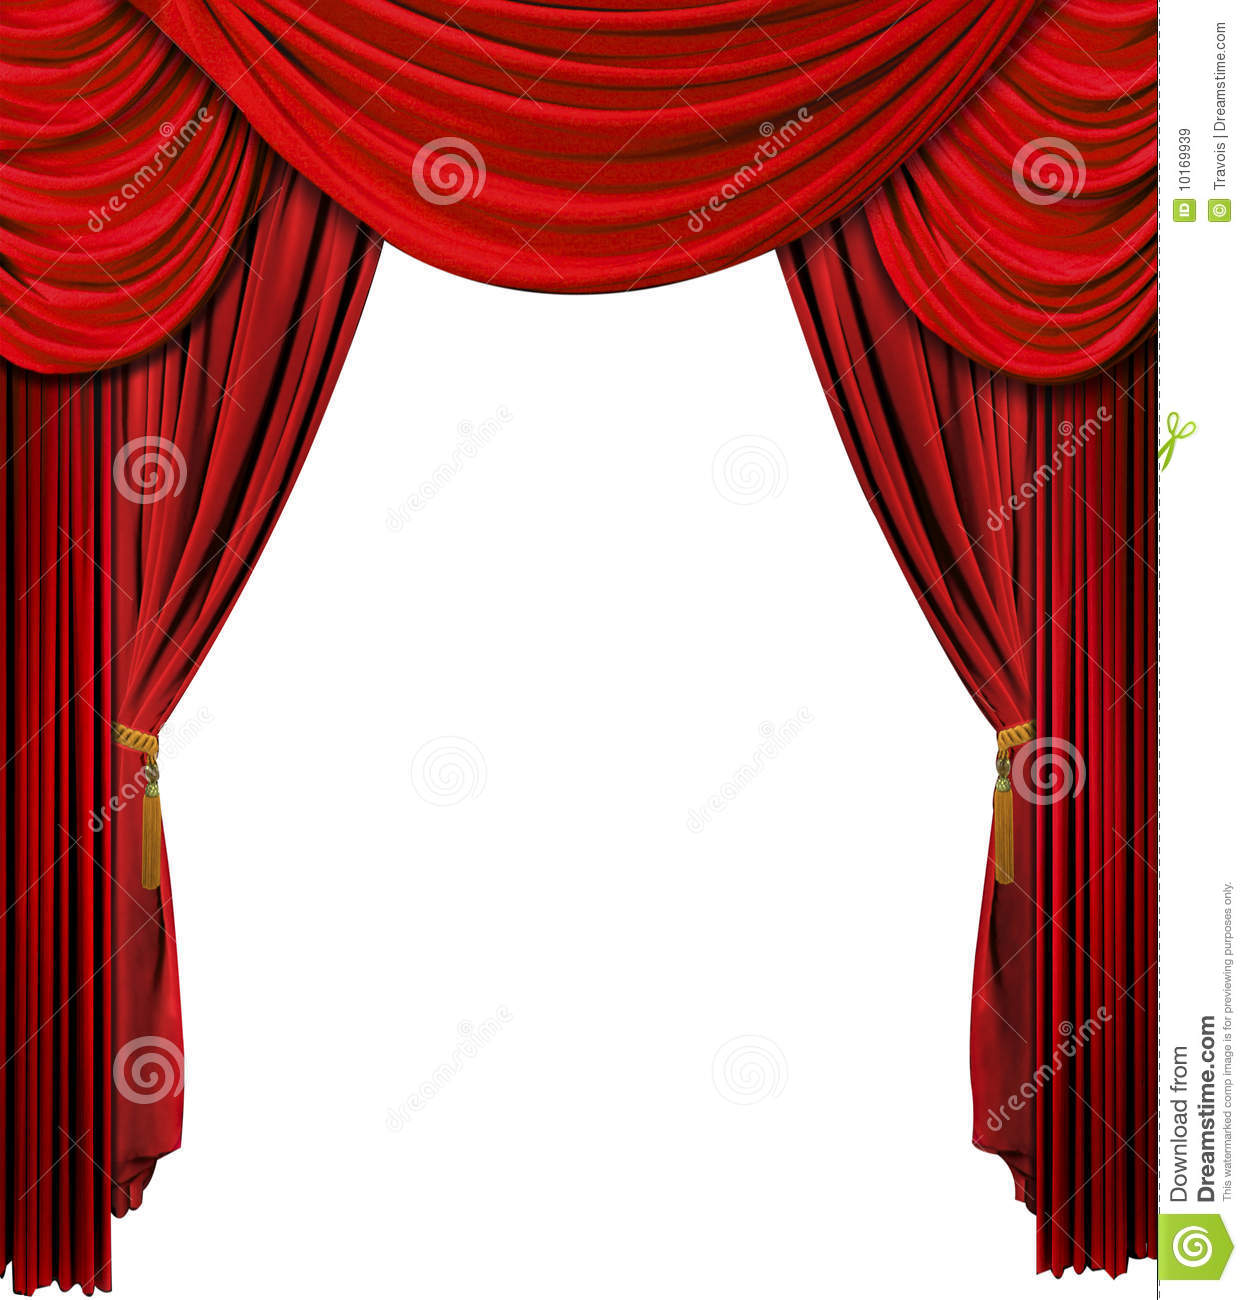 Old Fashioned Theater Stage Velvet Curtain Over White Background